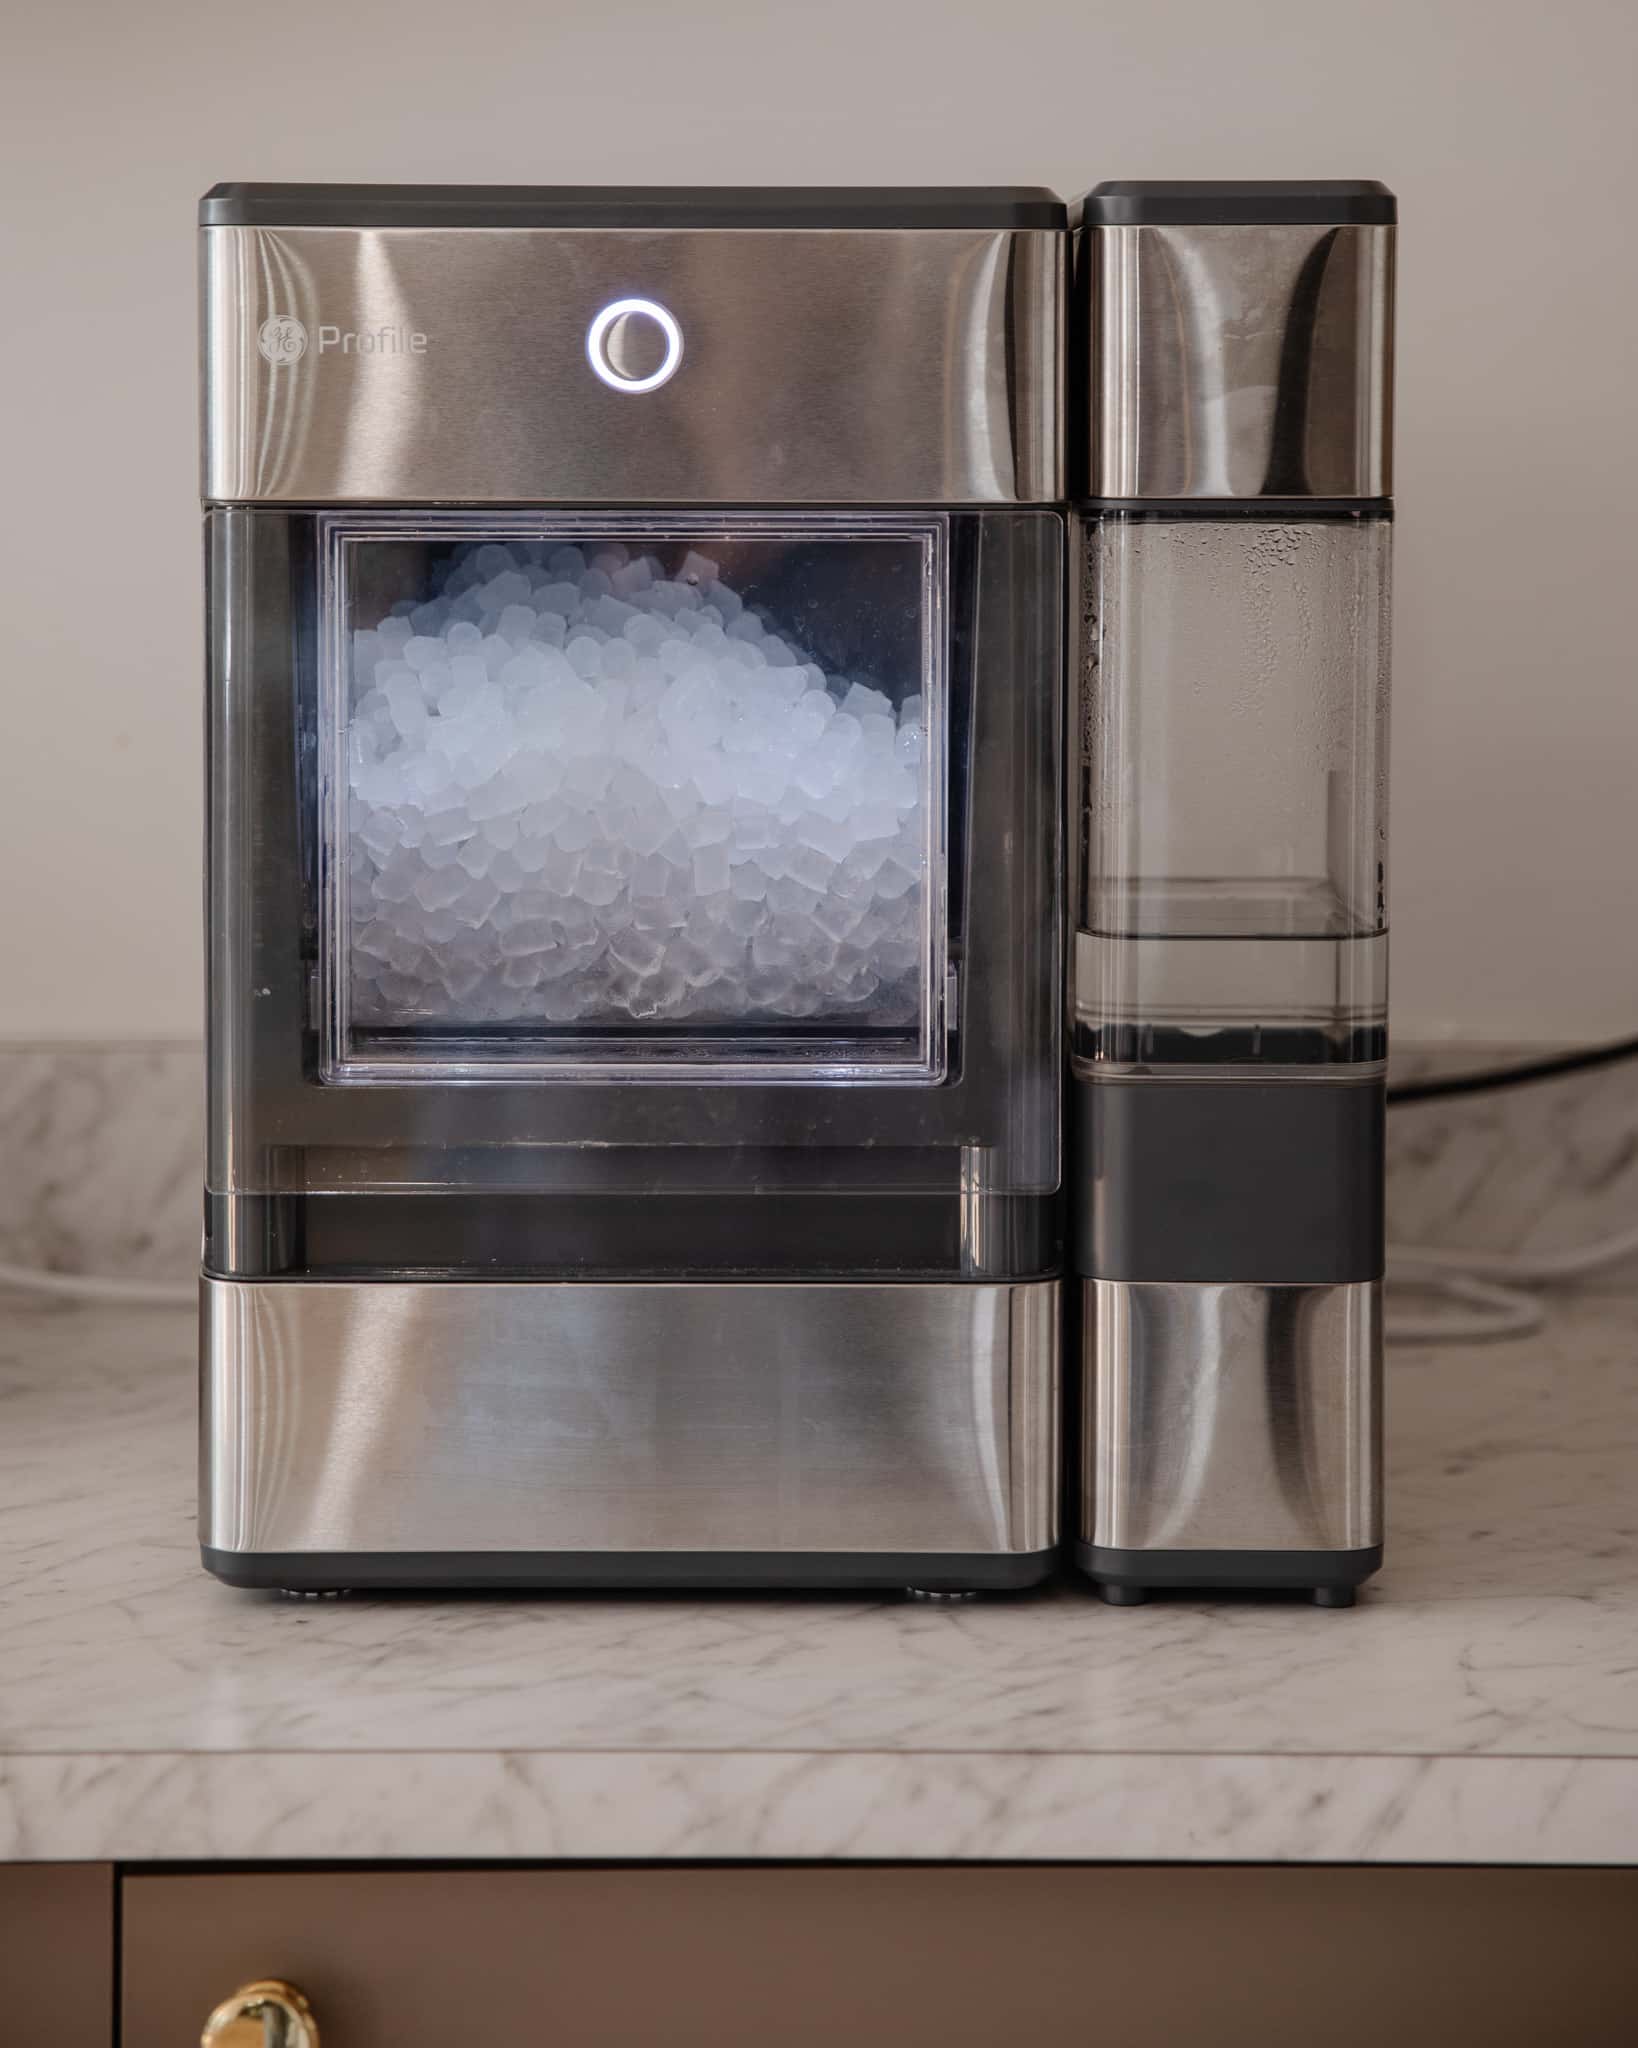 Learn How a Home Ice Machine Produces 'Sonic Ice' Chewable Nuggets